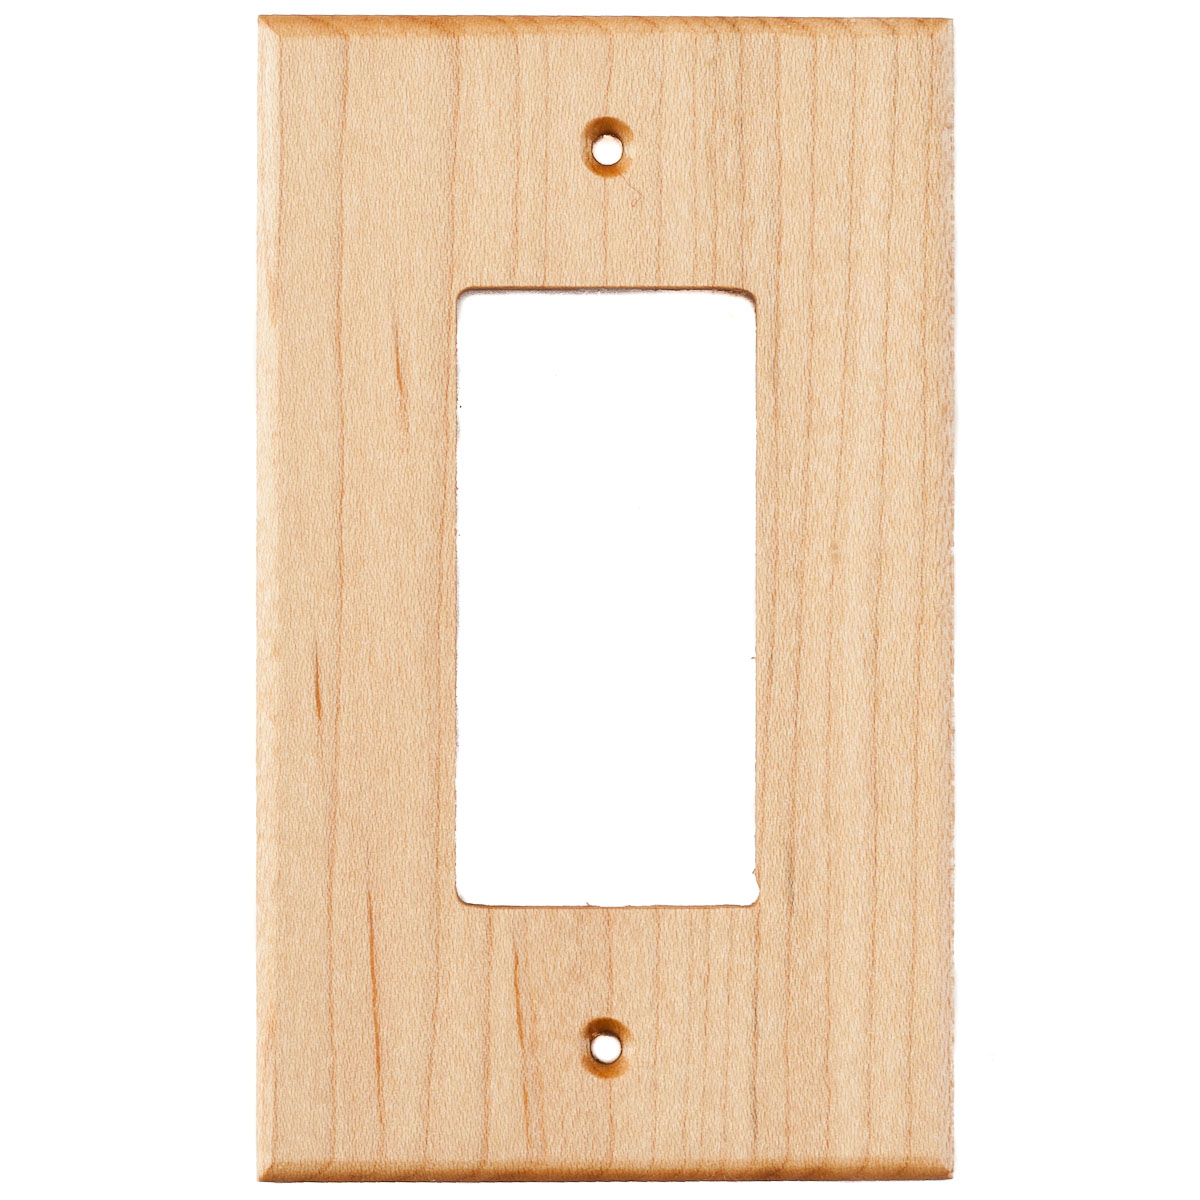 Oak Wood Wall Plate - 2 Gang Combo - Light Switch, GFCI Outlet Cover